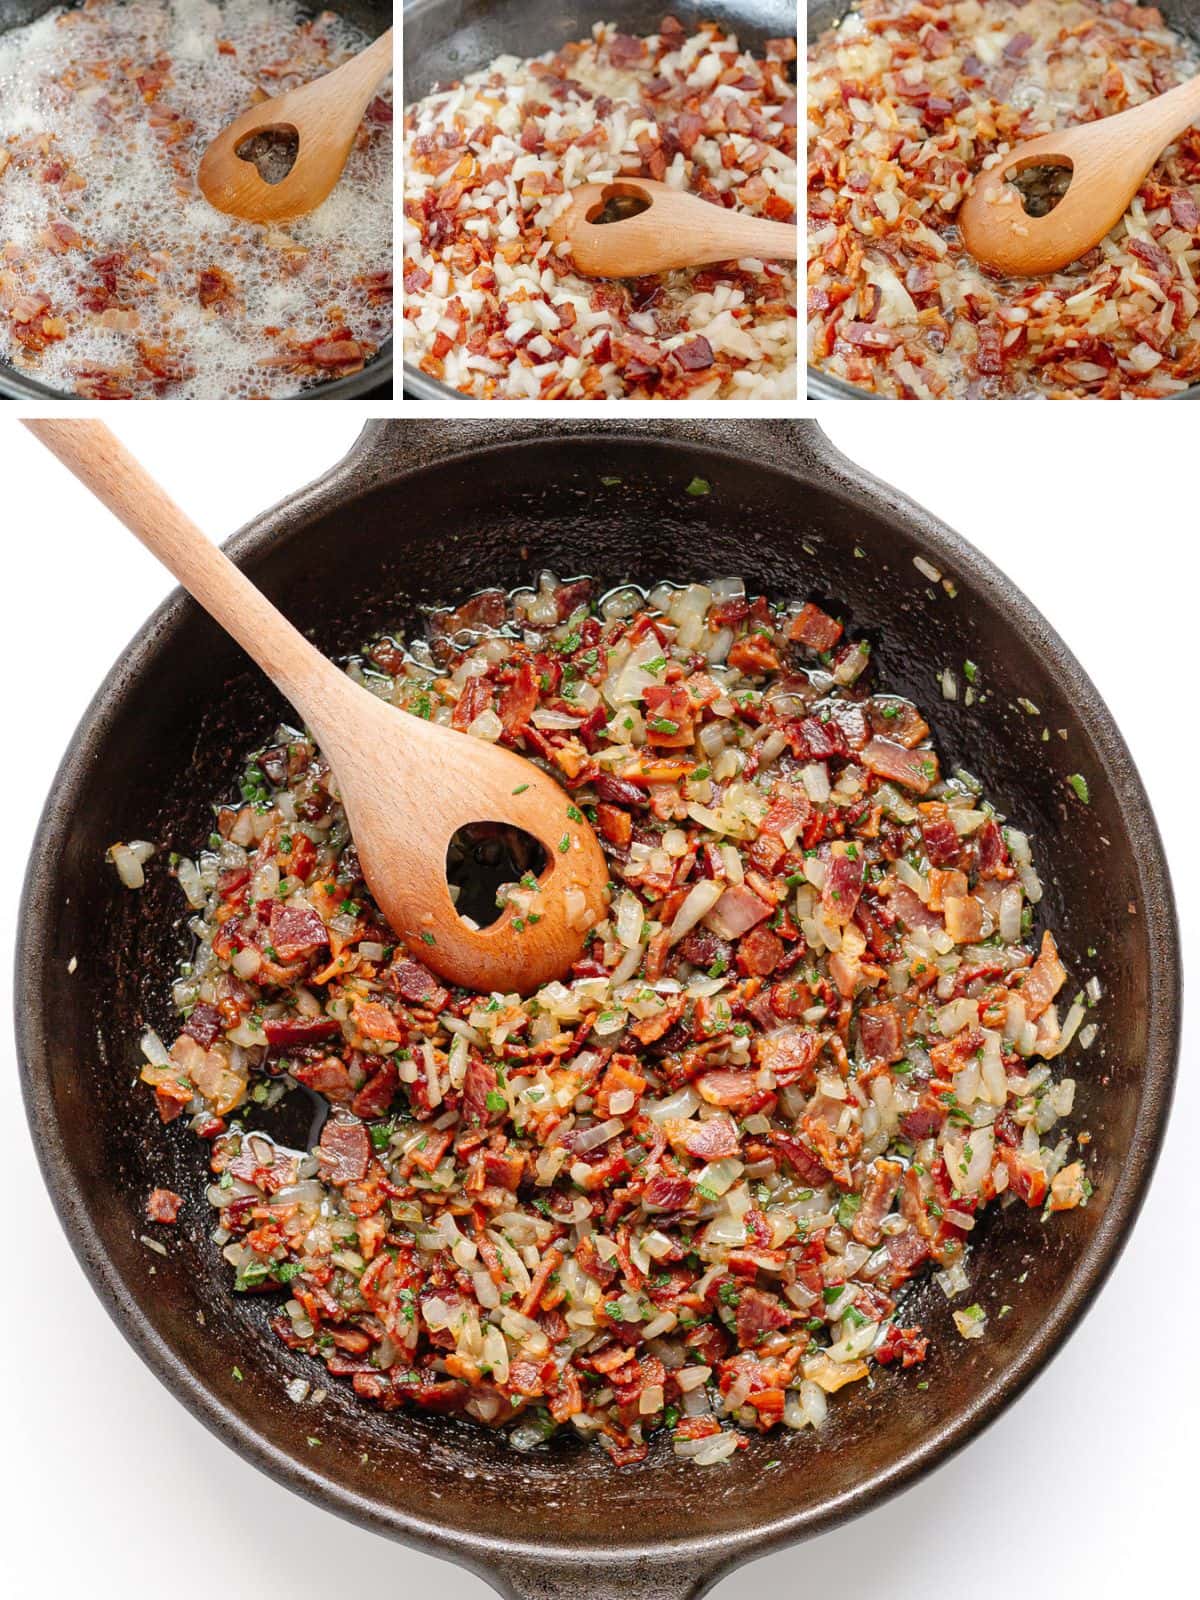 Photo collage showing stages of the bacon, onion and sage mixture being sauteed for stuffing.